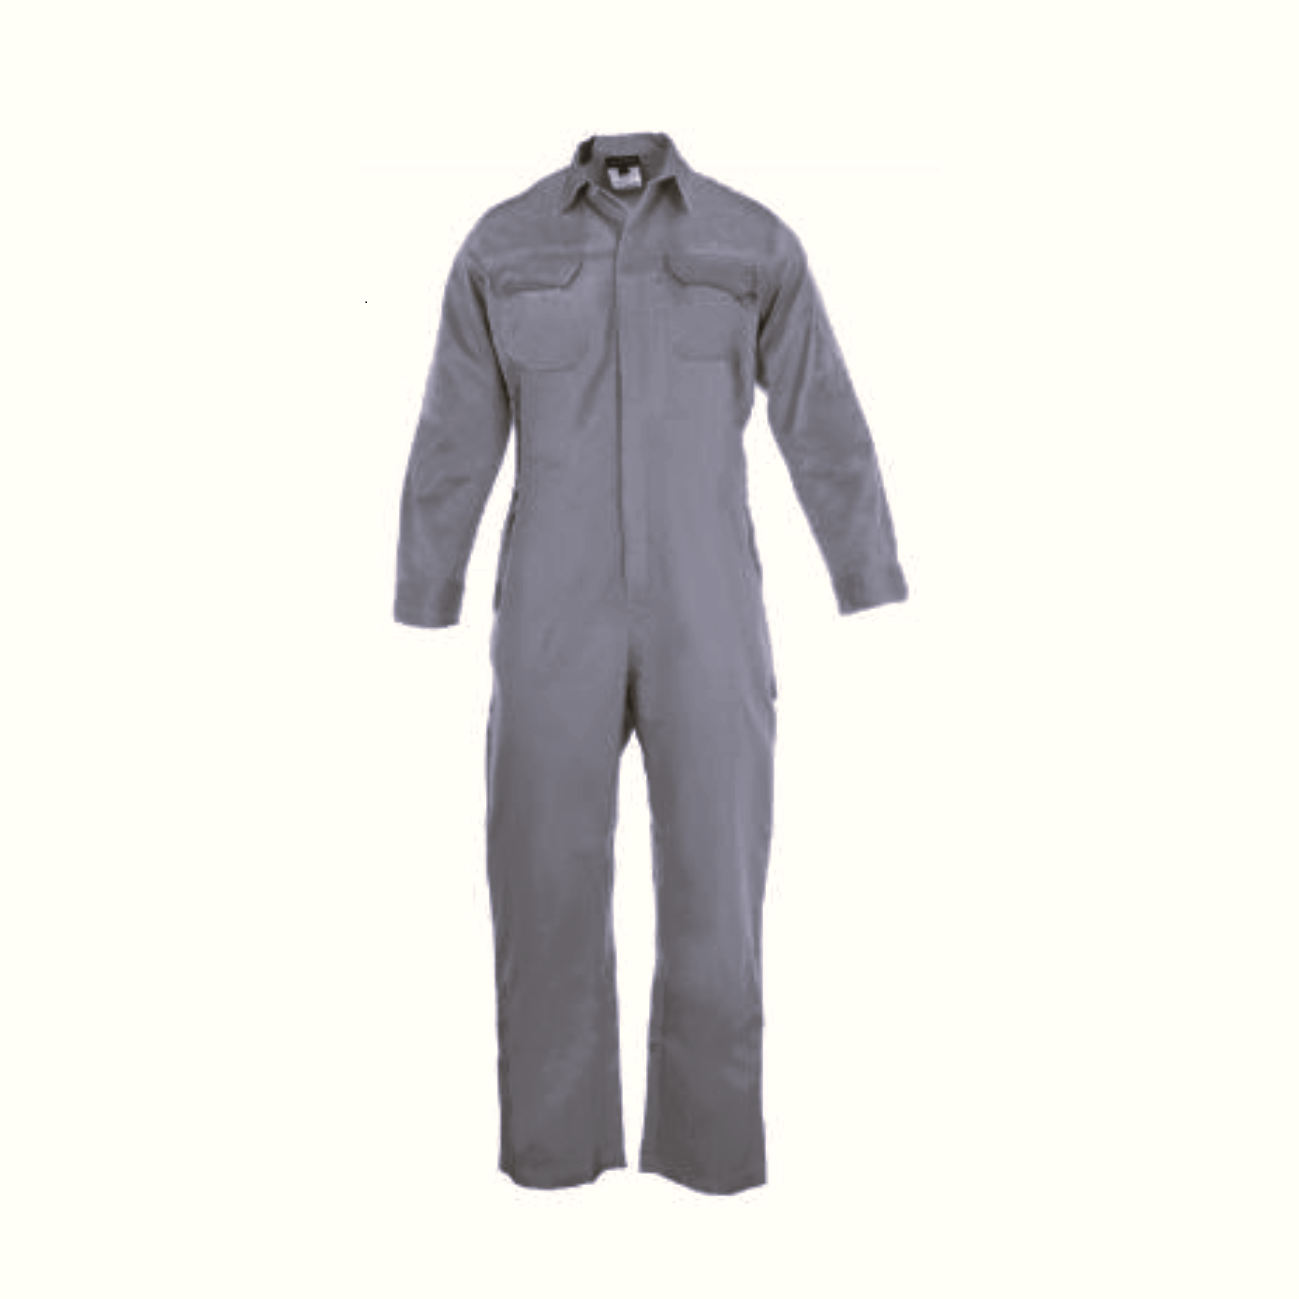 Flame Resistant Coverall